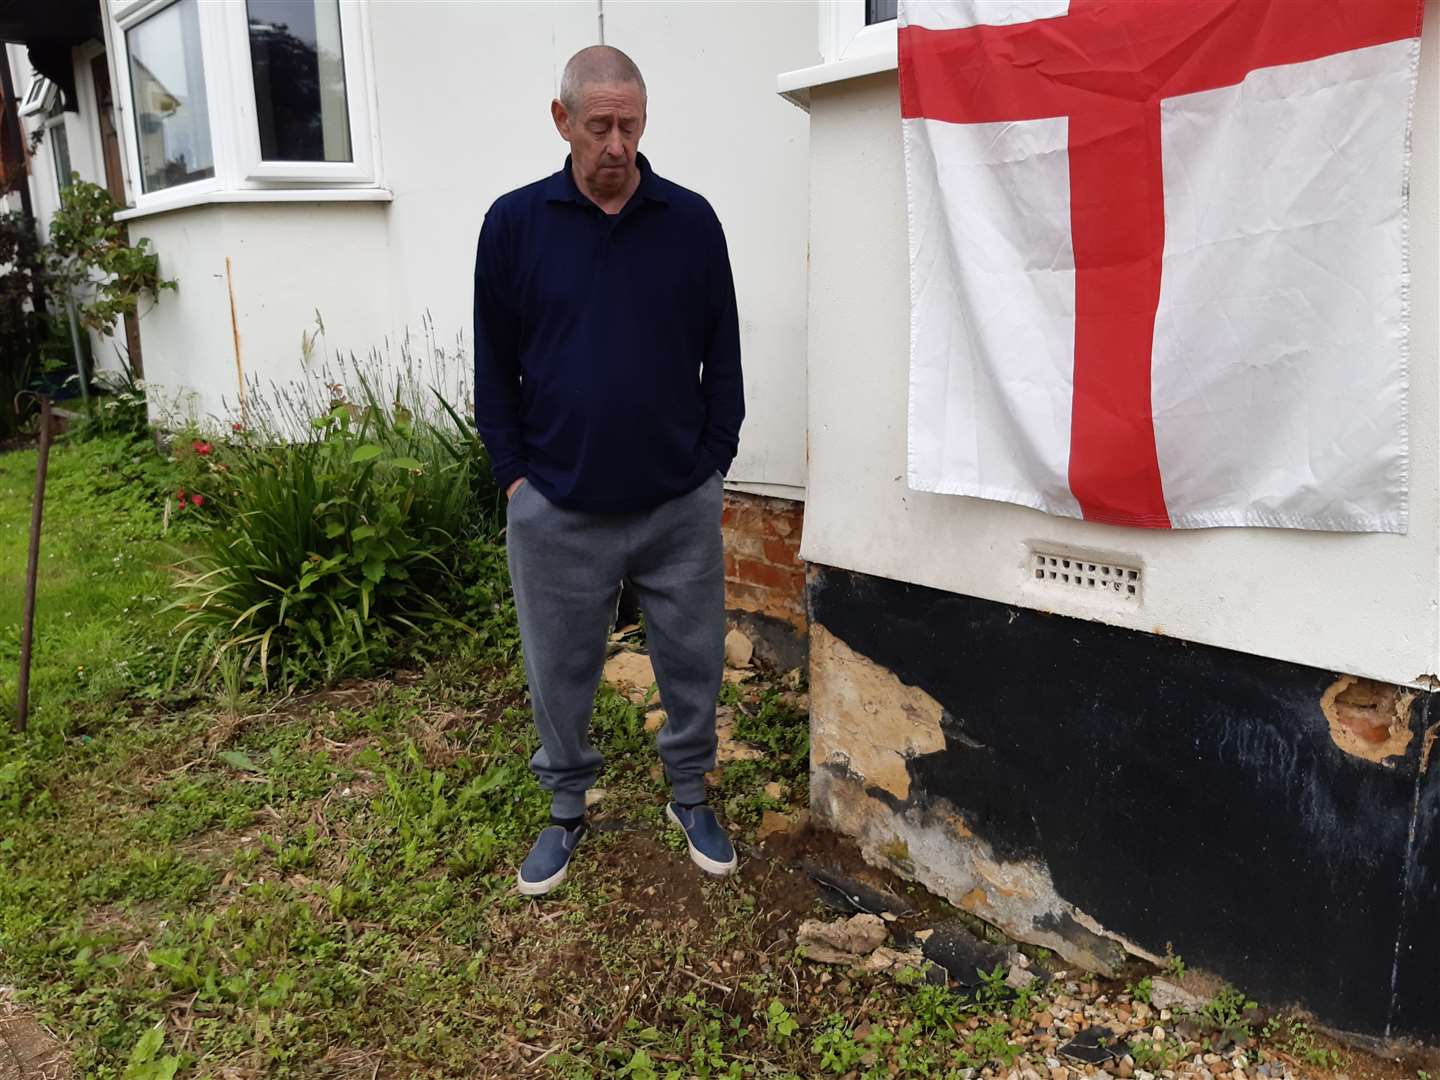 Former bin man Ron Garrott next to a small void in his front garden, which increased in size after recent heavy rainfall